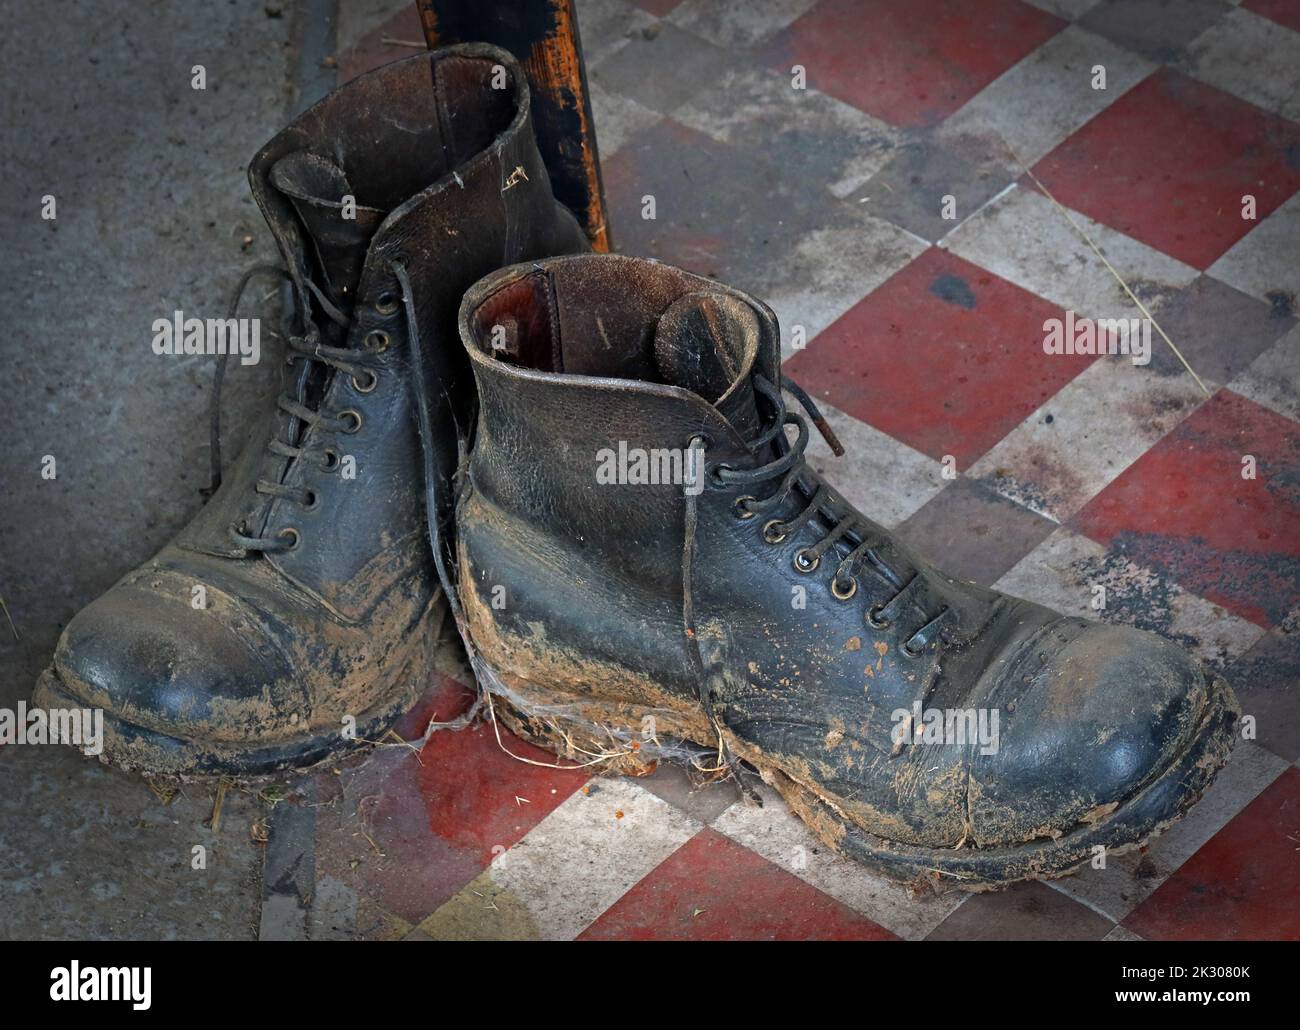 Muddy leather work boots, on ceramic tiles Stock Photo